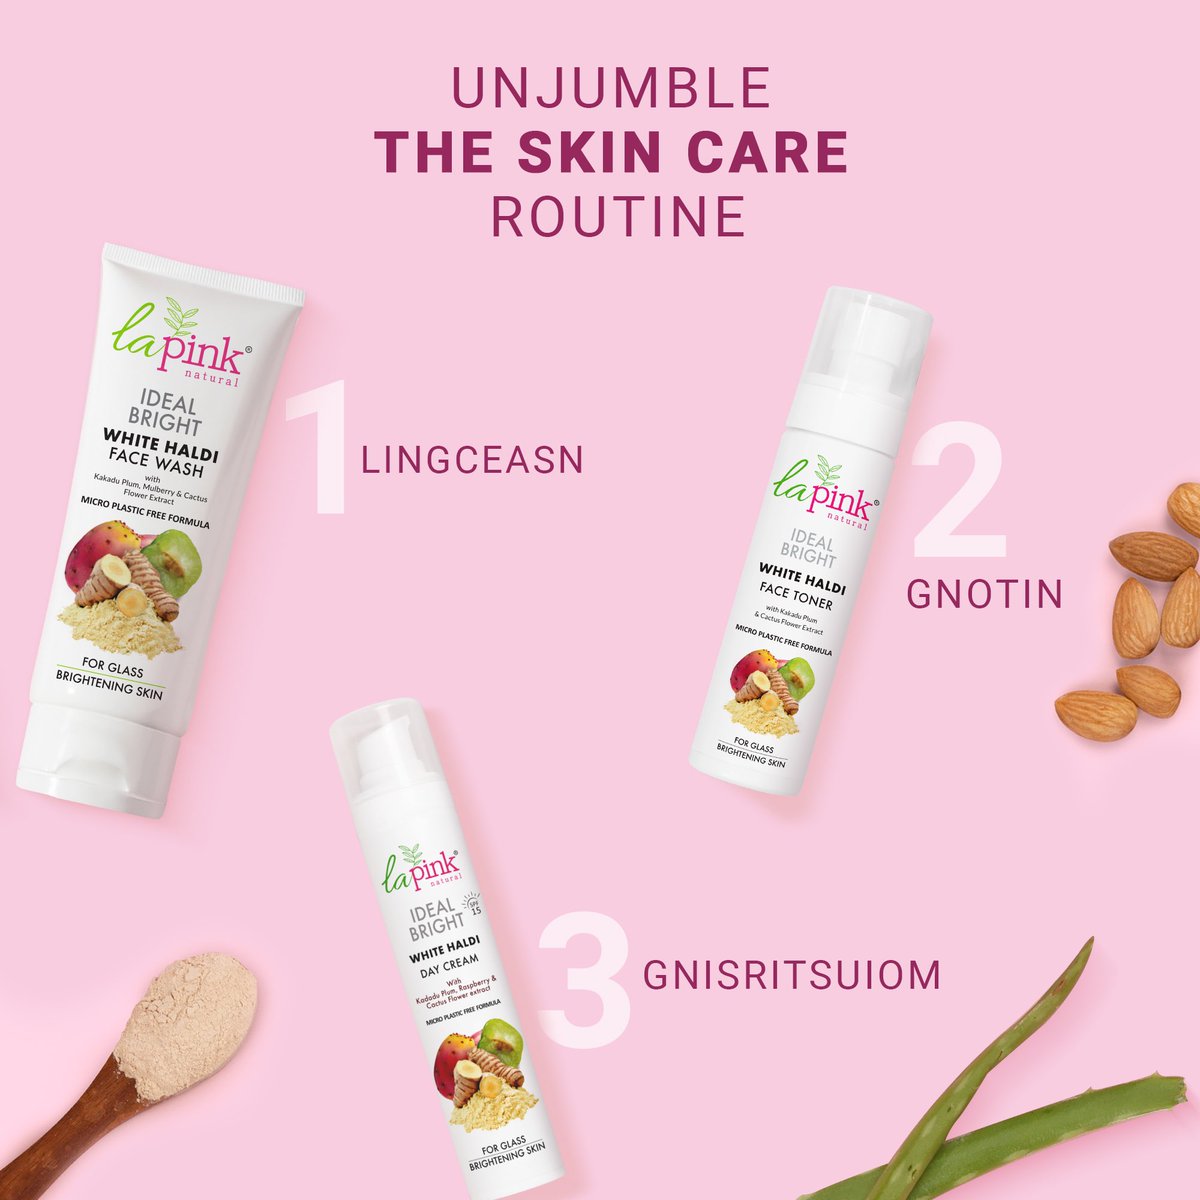 #UnjumbleTheWord #SkincareQuiz! 🌟

Hint: These are the building blocks of a perfect skincare routine! 💧✨

Share your answers and tag a friend who needs some skincare wisdom! 👇😊

#LaPink #ZeroMicroplasticsInside #MadeSafe #ToxinFree #HealthySkin #GlowingSkin #BeautyRoutine